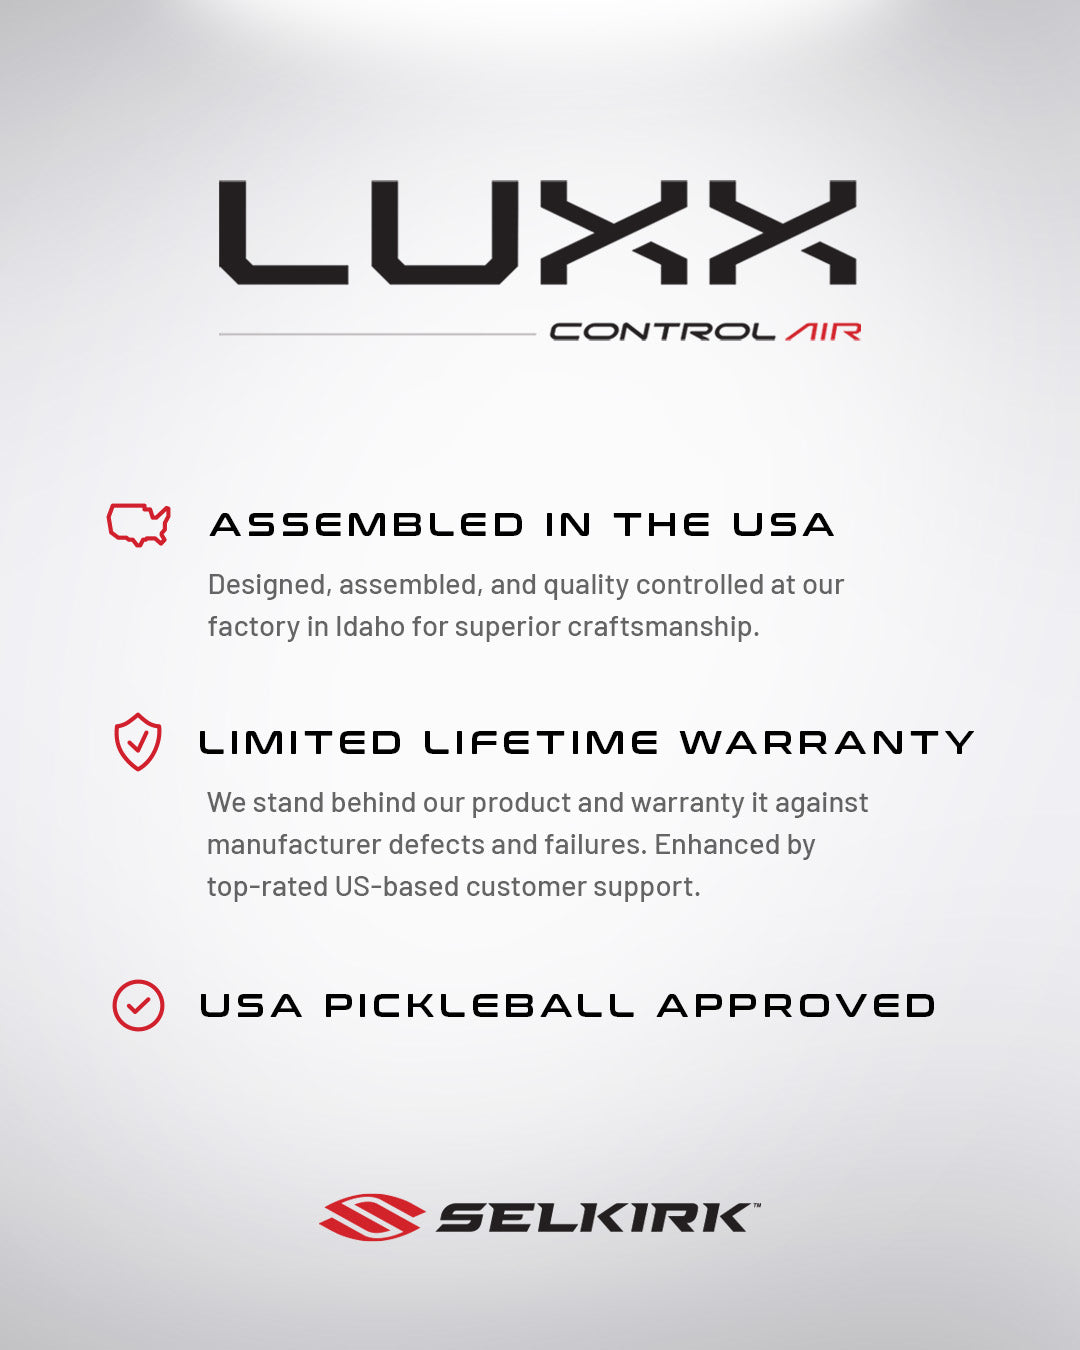 LUXX Control Air S2 by Selkirk Sport